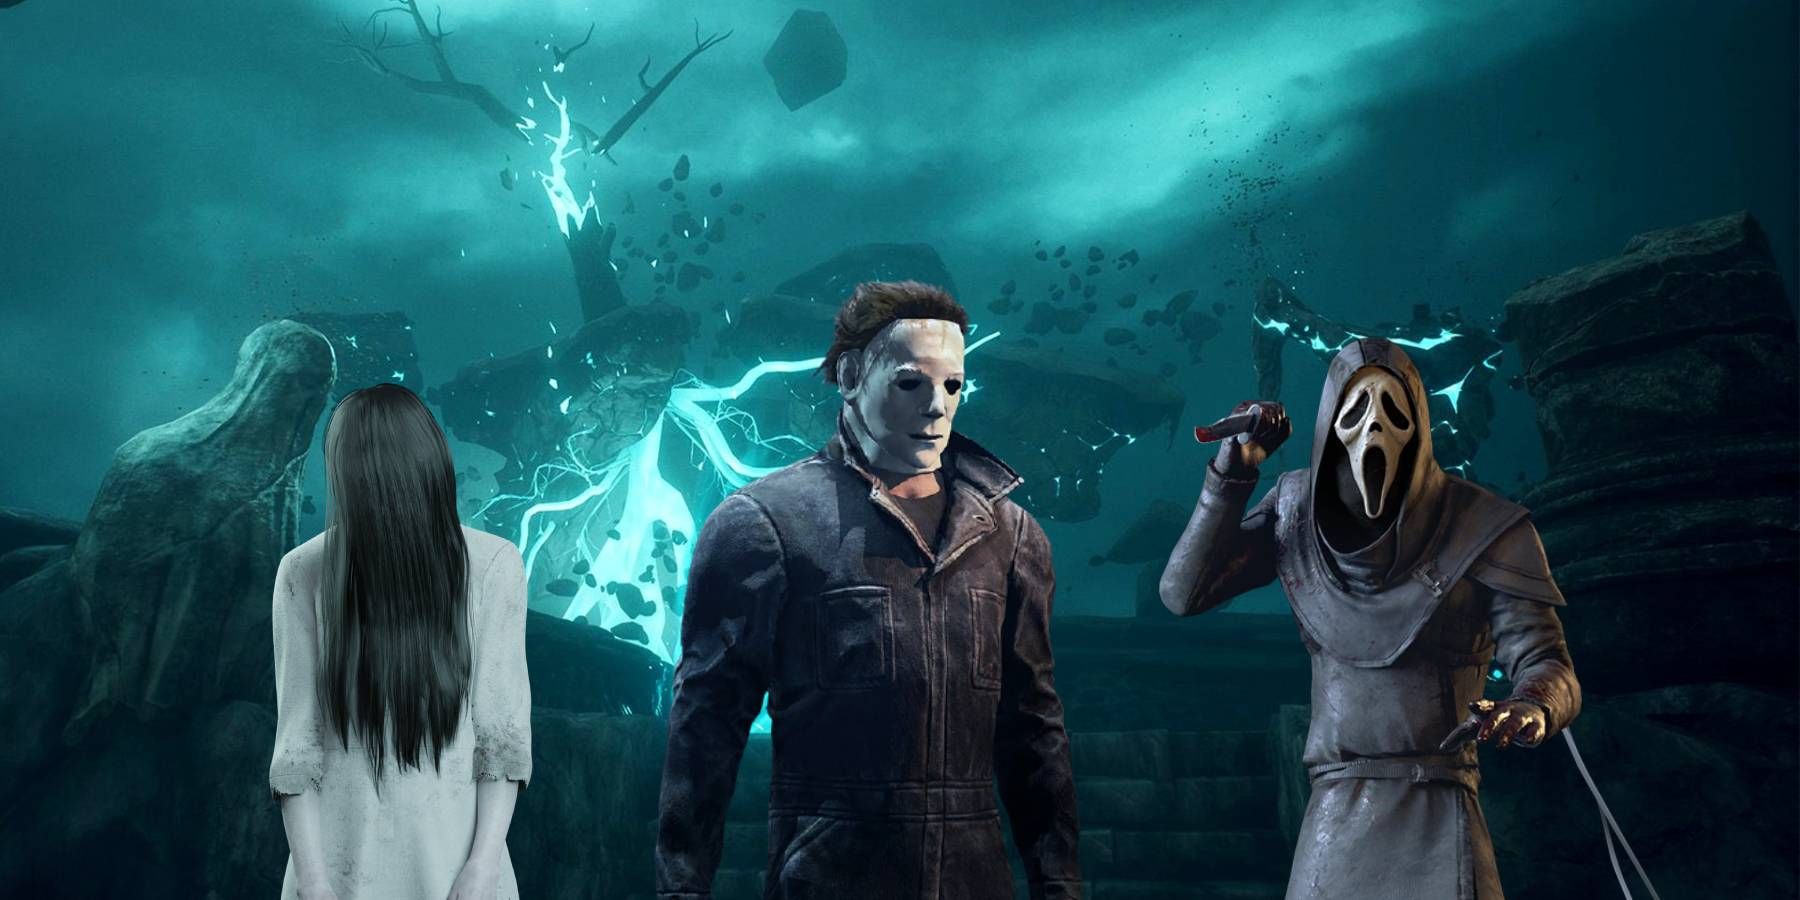 Sadako, Michael Myers, and Ghostface in the Void from Dead by Daylight